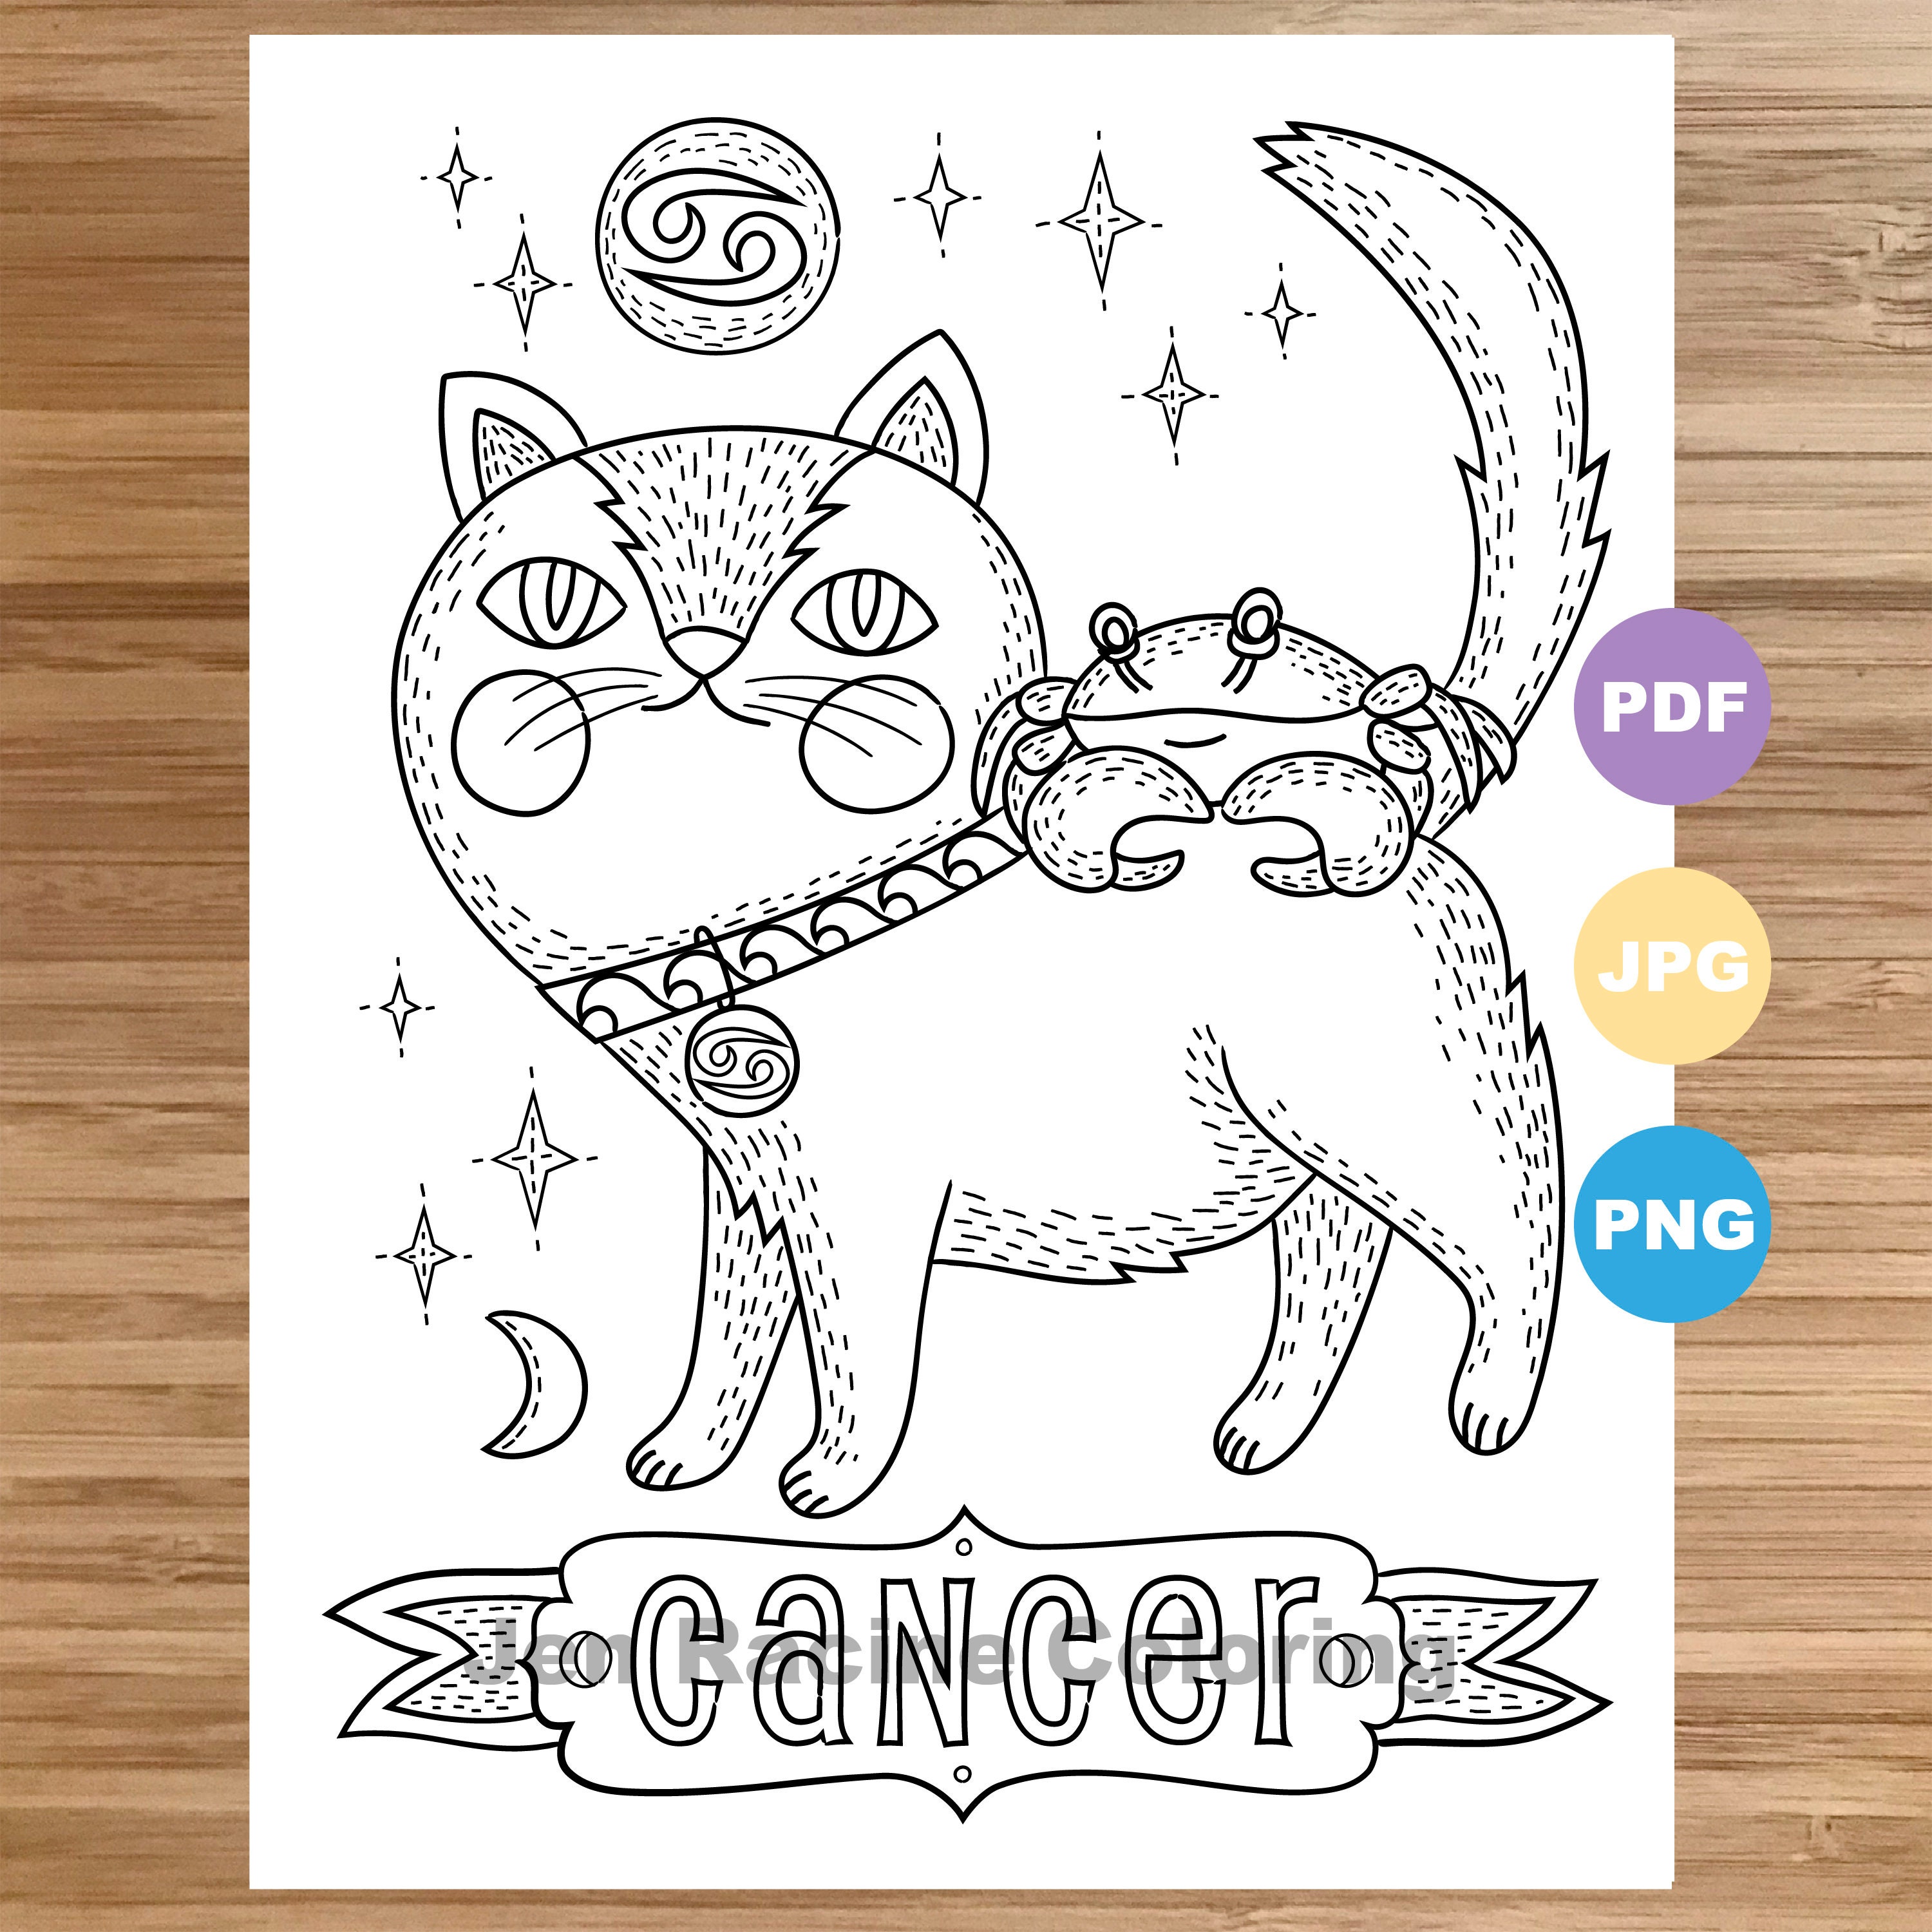 Cancer cat coloring page zodiac animal art cats astrology coloring page printable coloring page for kids coloring page for adults